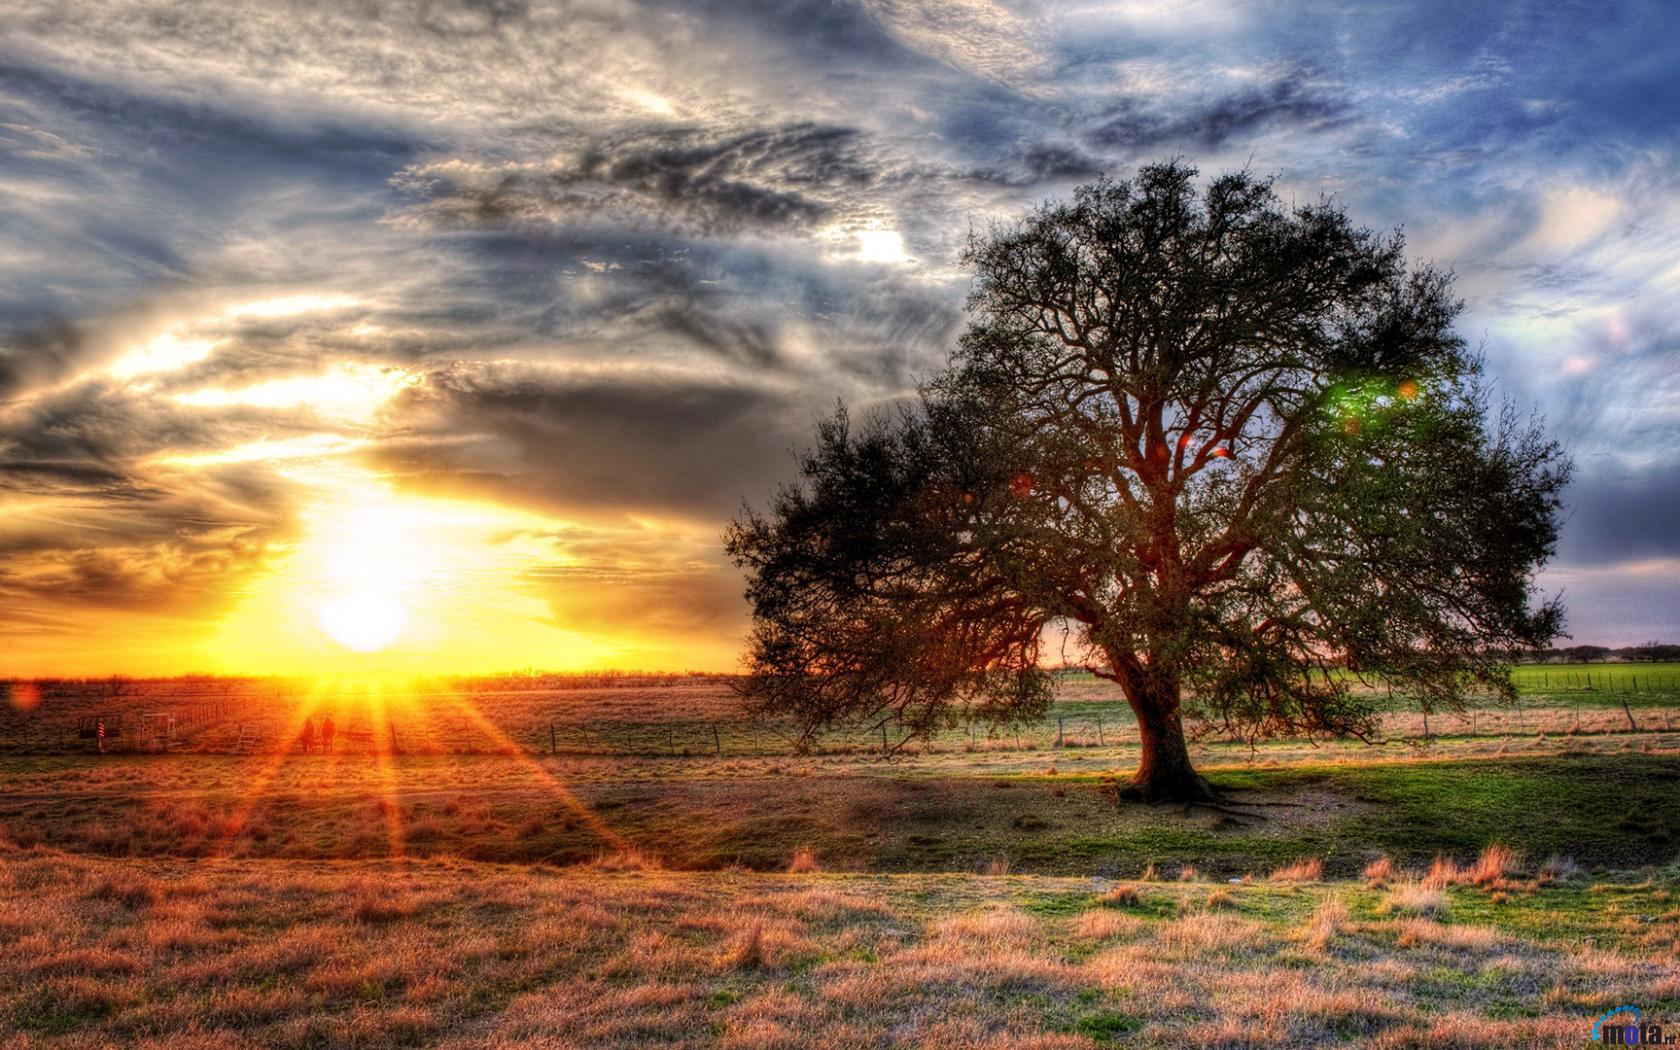 Download Wallpaper HDR Sunset on a Texas Farm (1680 x 1050 ...